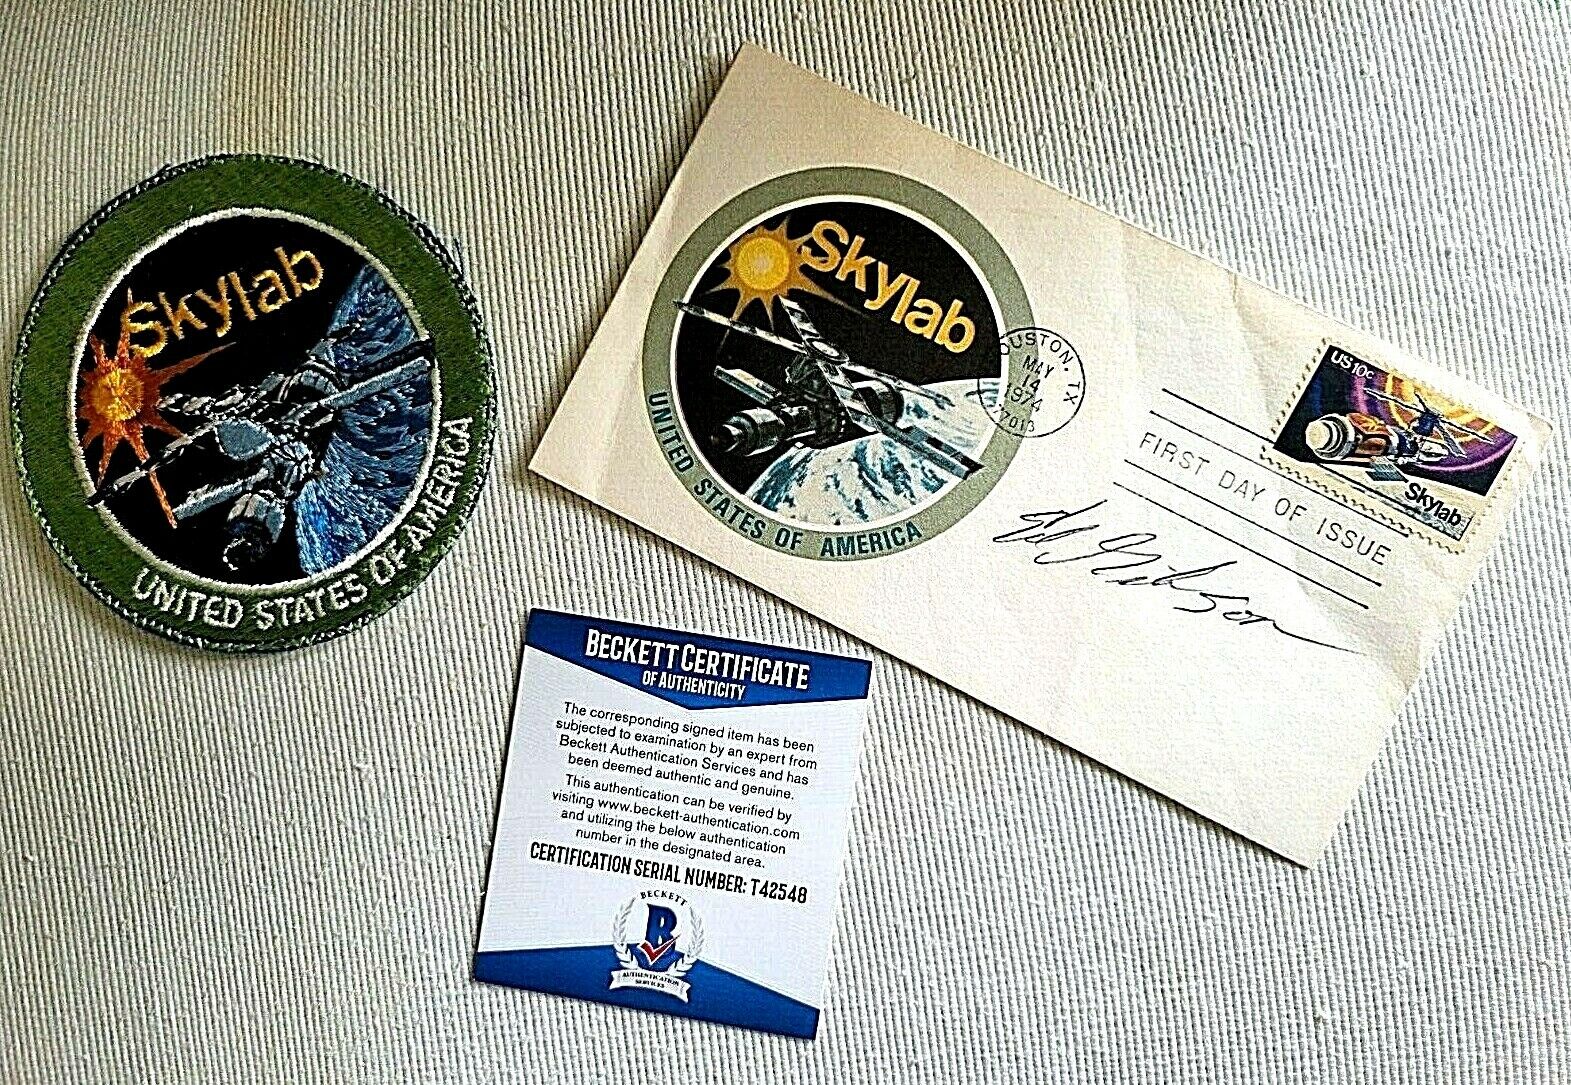 ED GIBSON SkyLab ASTRONAUT Signed NASA FDC Autographed with Patch BECKETT T42548 Без бренда